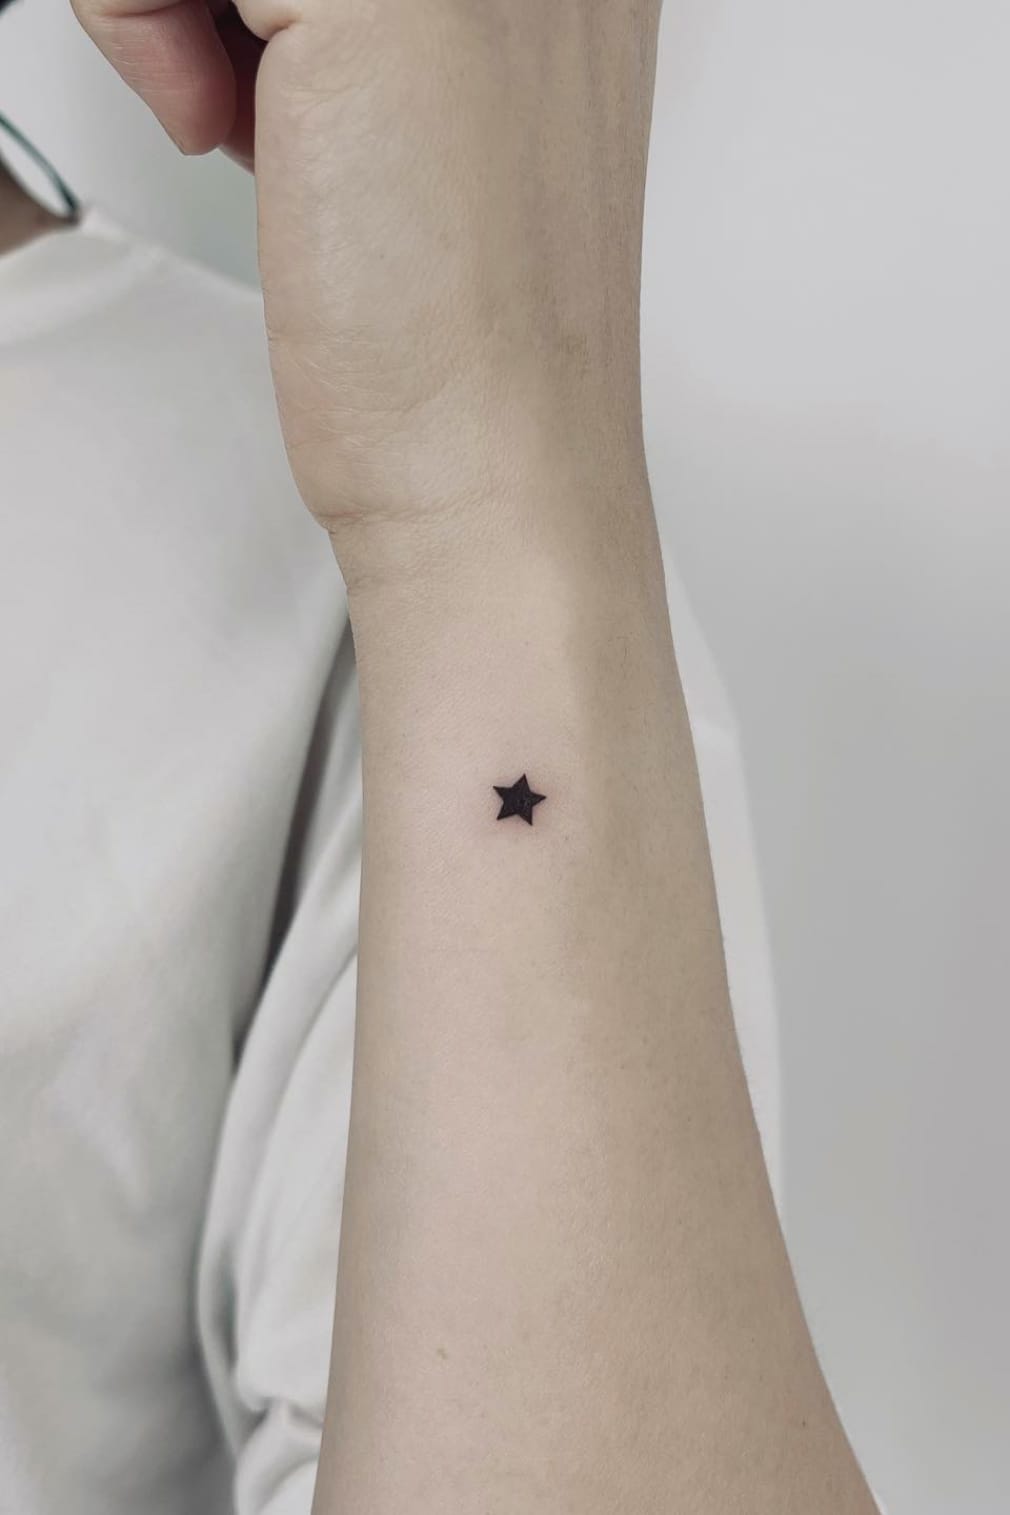 Small Five-pointed Star Tattoo